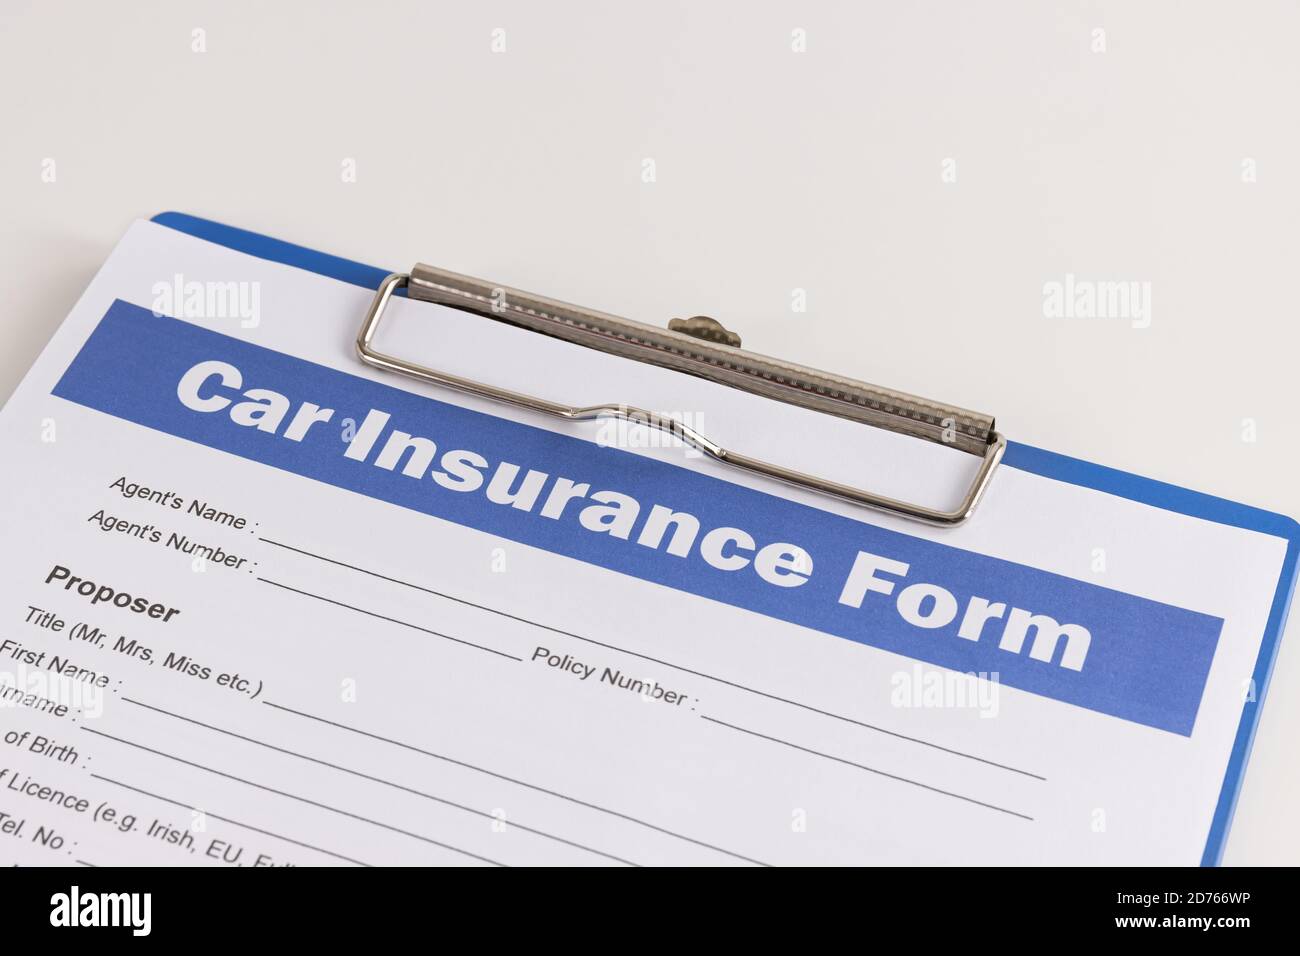 Car Insurance Claim Form or Auto Insurance Document on Right Slant and Clipboard on White Office Table Stock Photo